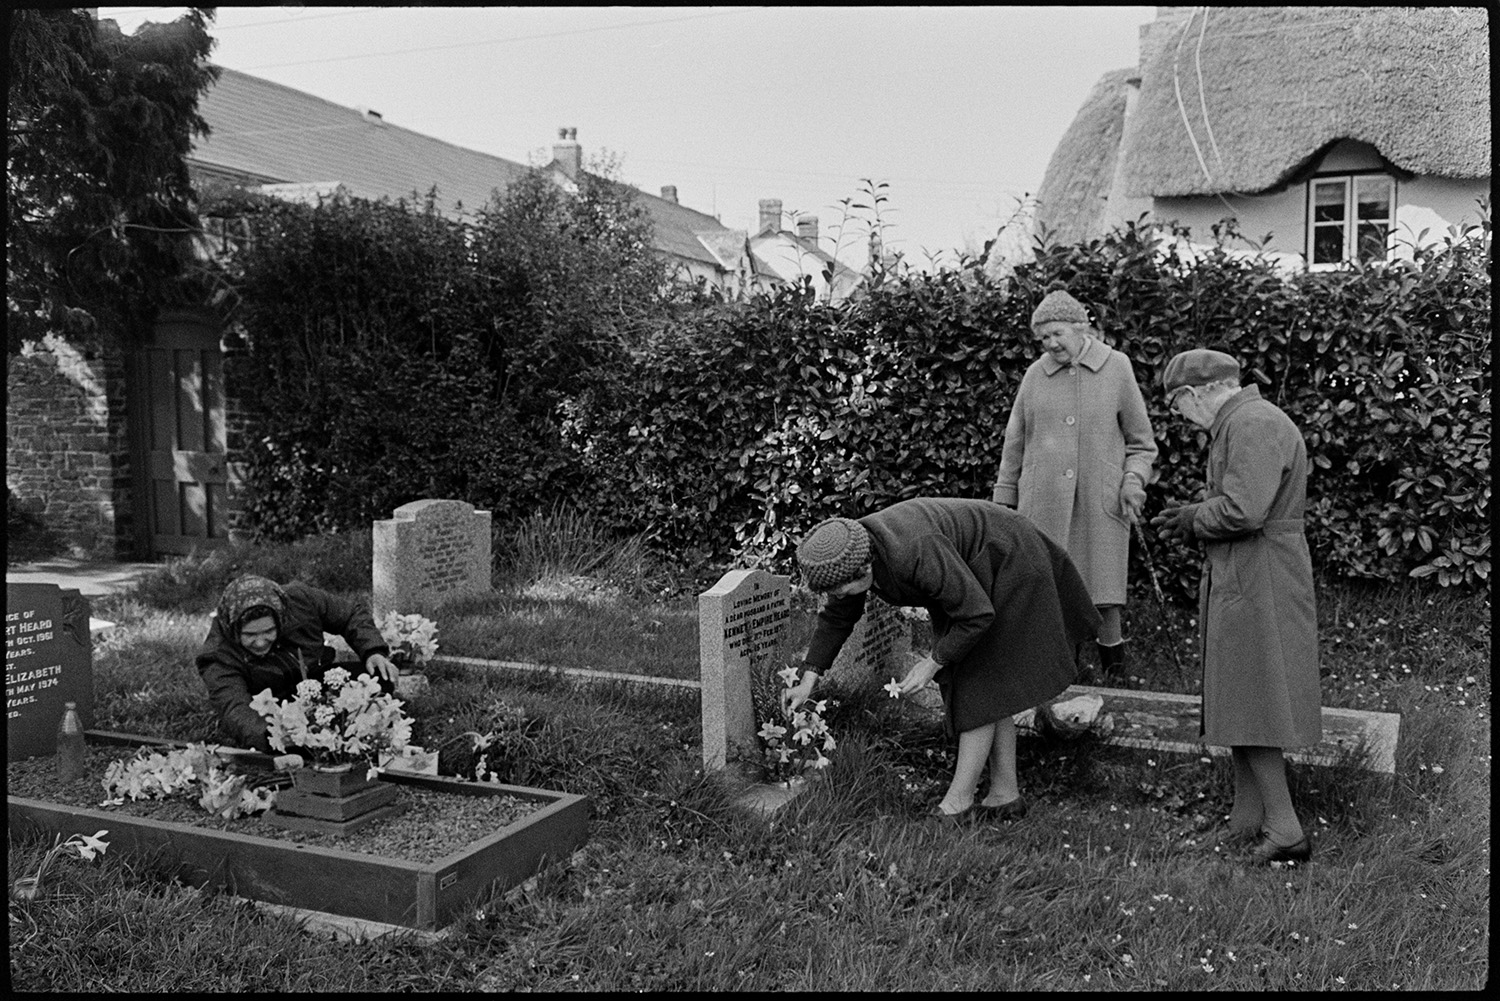 People putting flowers on graves at Easter time. 
[Four women putting flowers on graves in Dolton churchyard at Easter. The flowers include daffodils. Thatched cottages are visible in the background.]